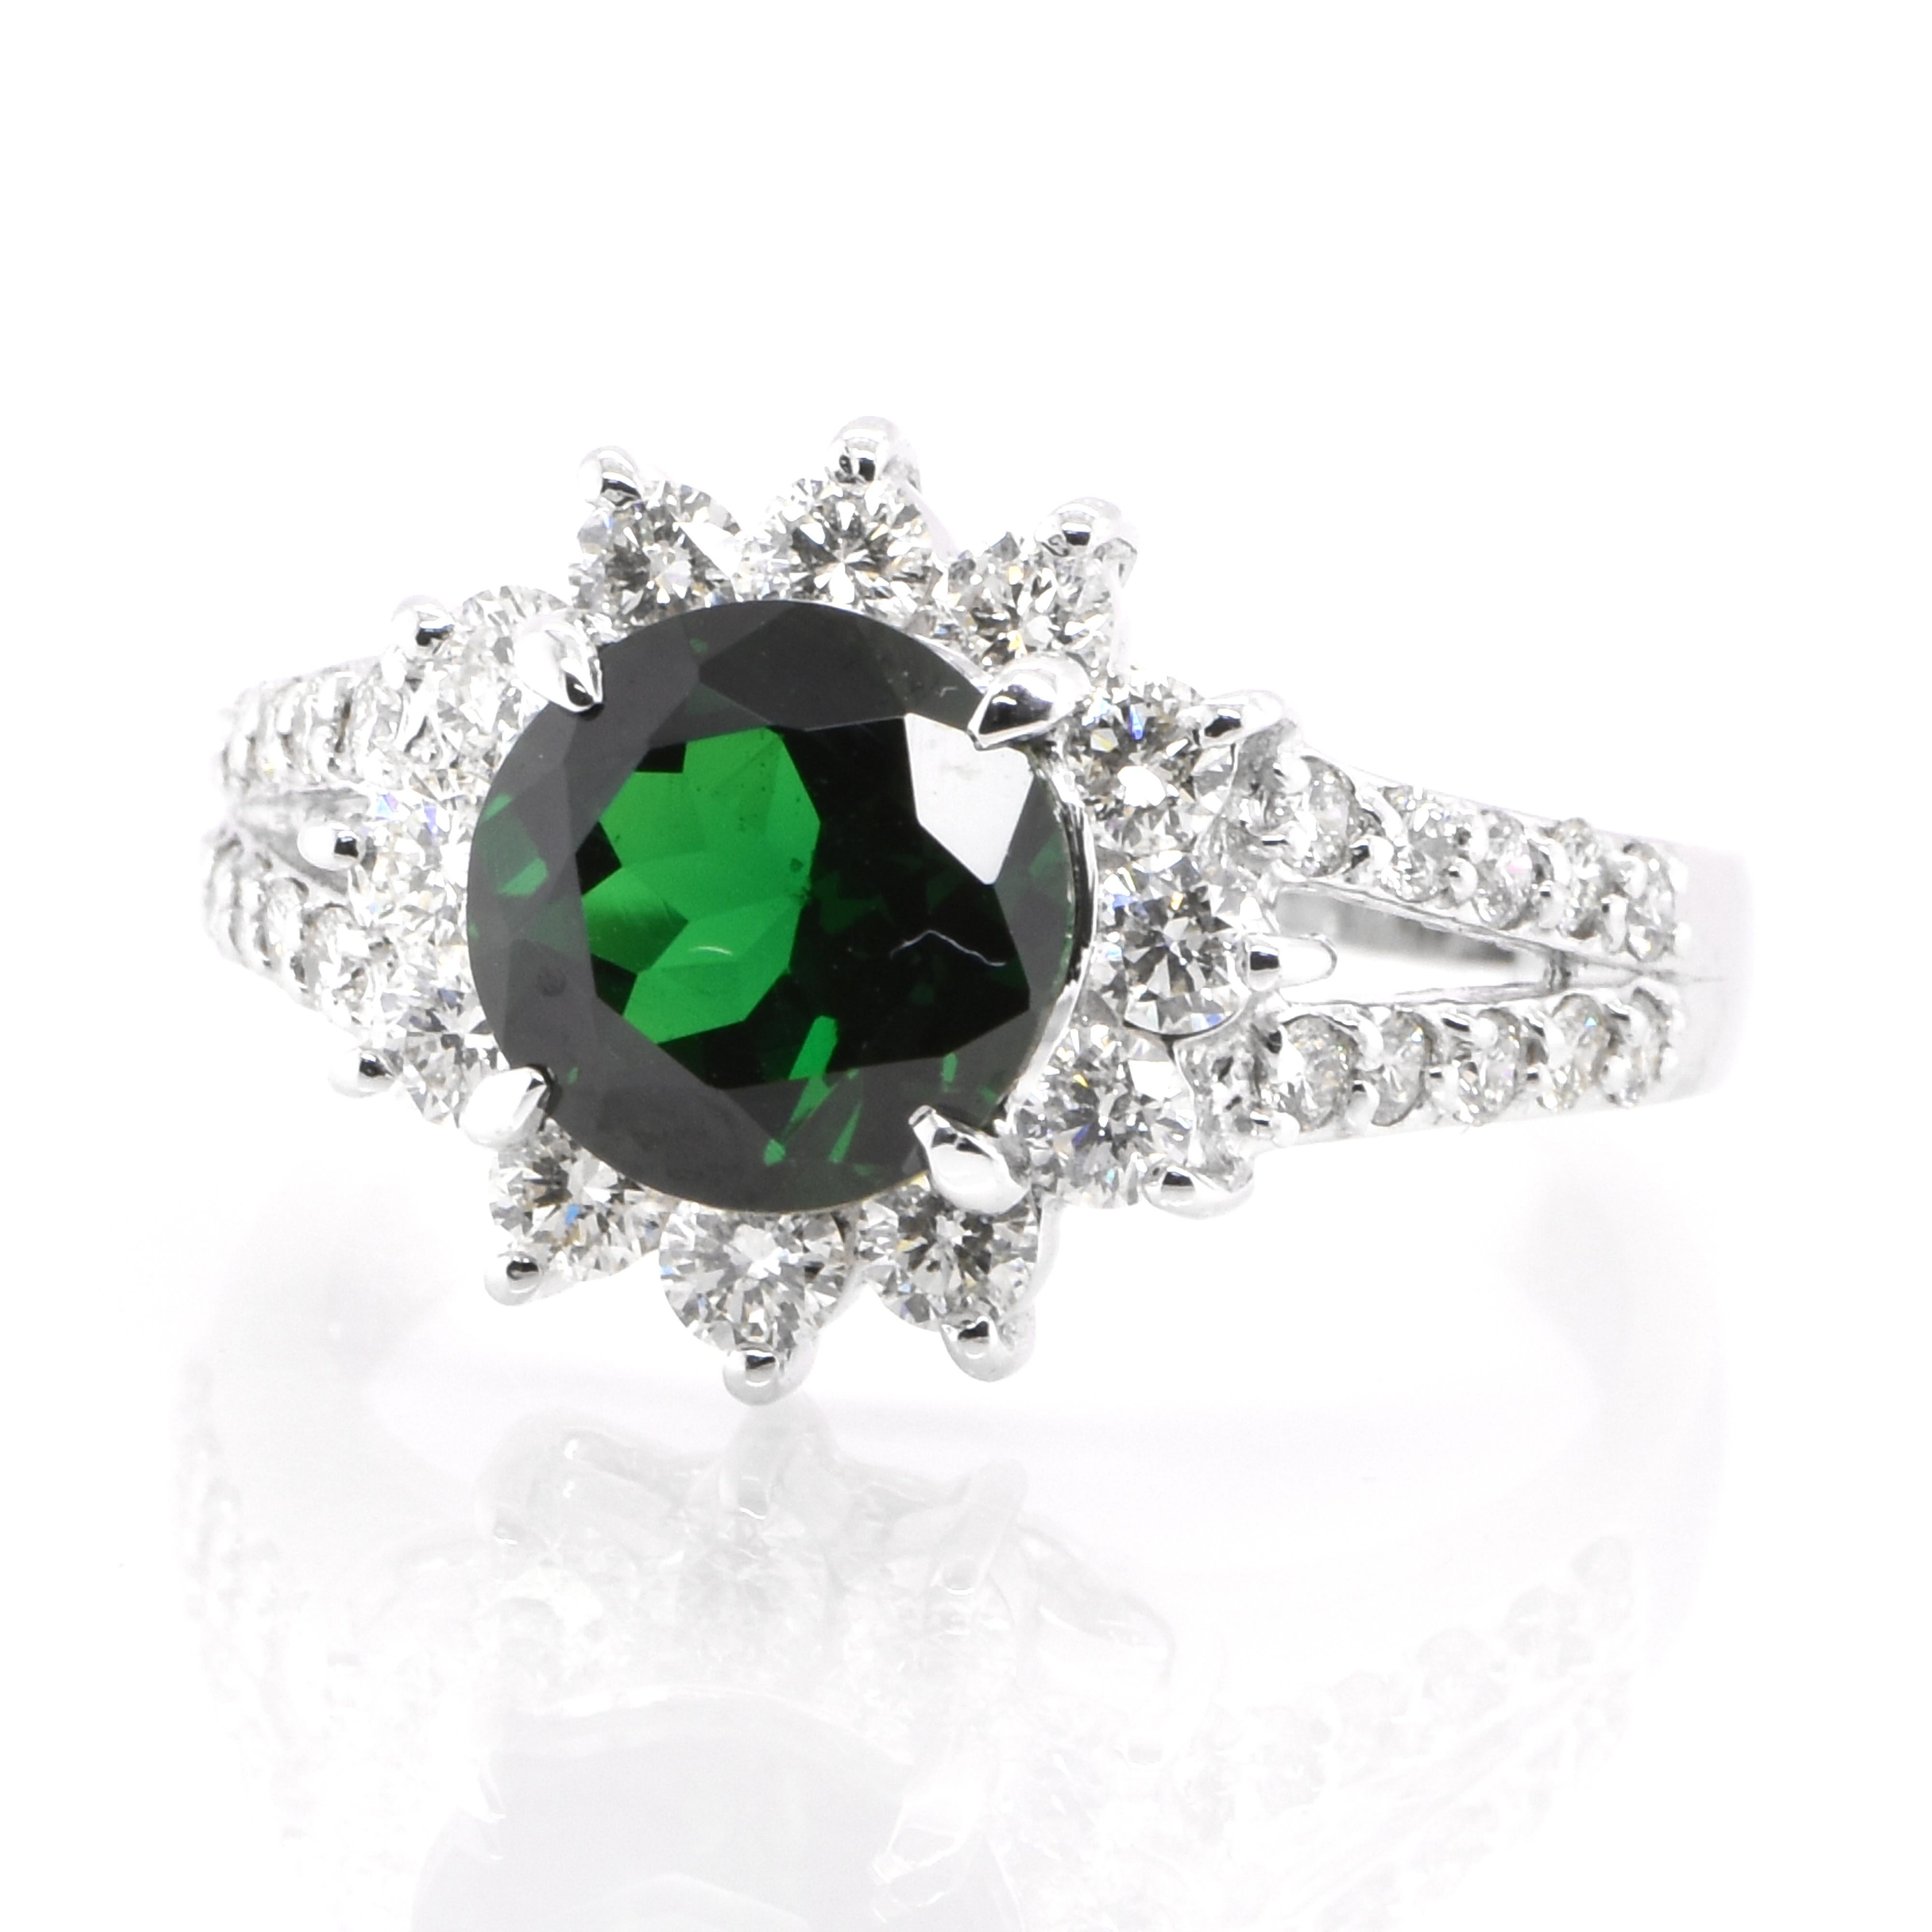 An absolutely gorgeous ring featuring a 1.825 Carat, Natural Tsavorite Garnet and 0.77 Carats of Diamond Accents set in Platinum. Garnets have been adorned by humans throughout history from Ancient Egypt, Rome and Greece. They come in a wide variety